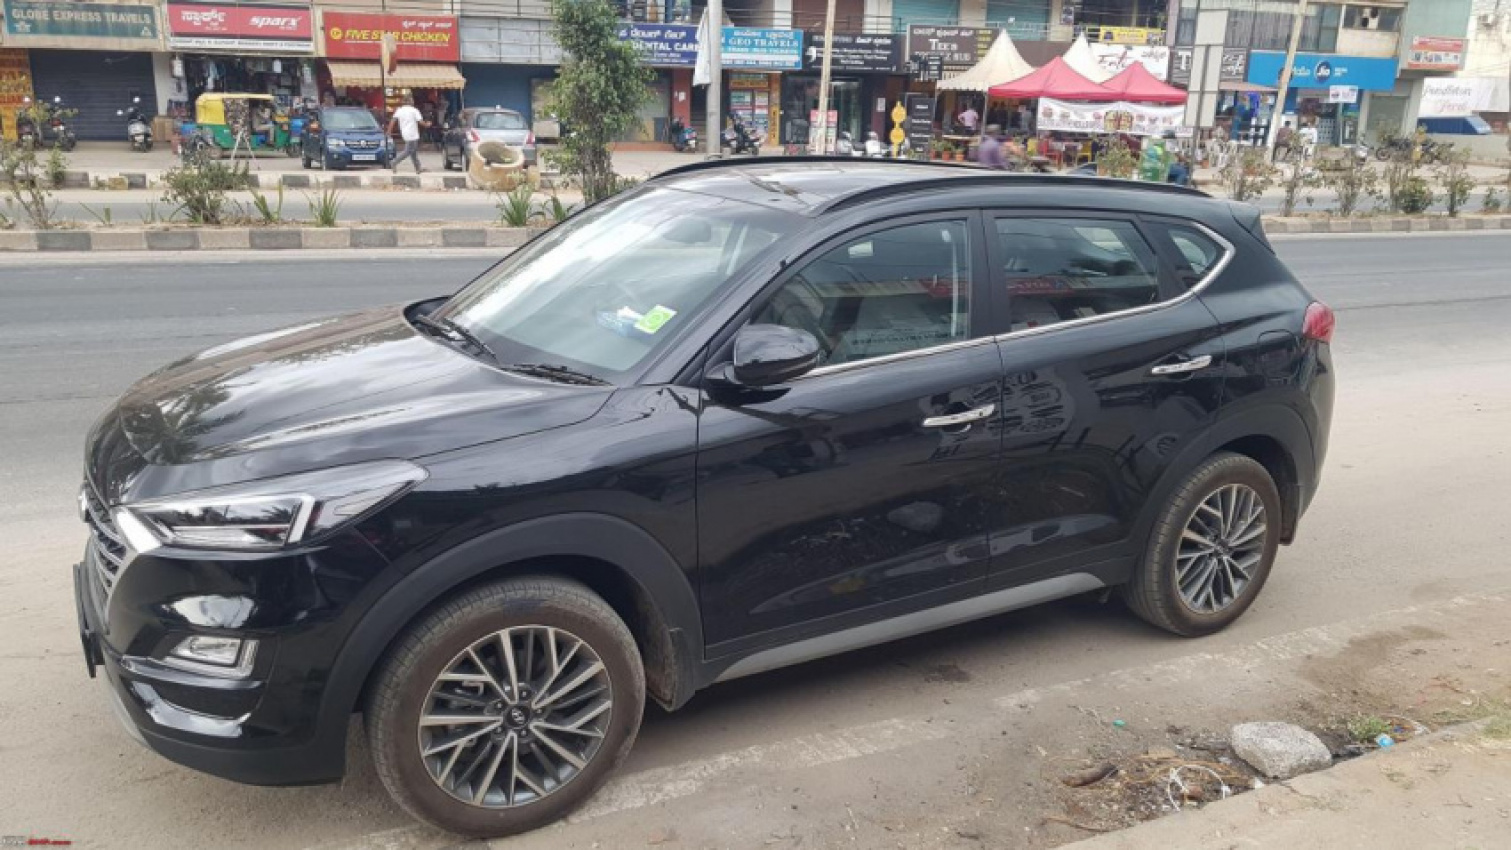 autos, cars, hyundai, android, car purchase, hyundai tucson, indian, member content, tucson, android, maruti wagonr to hyundai tucson: much-needed car upgrade after 17 years